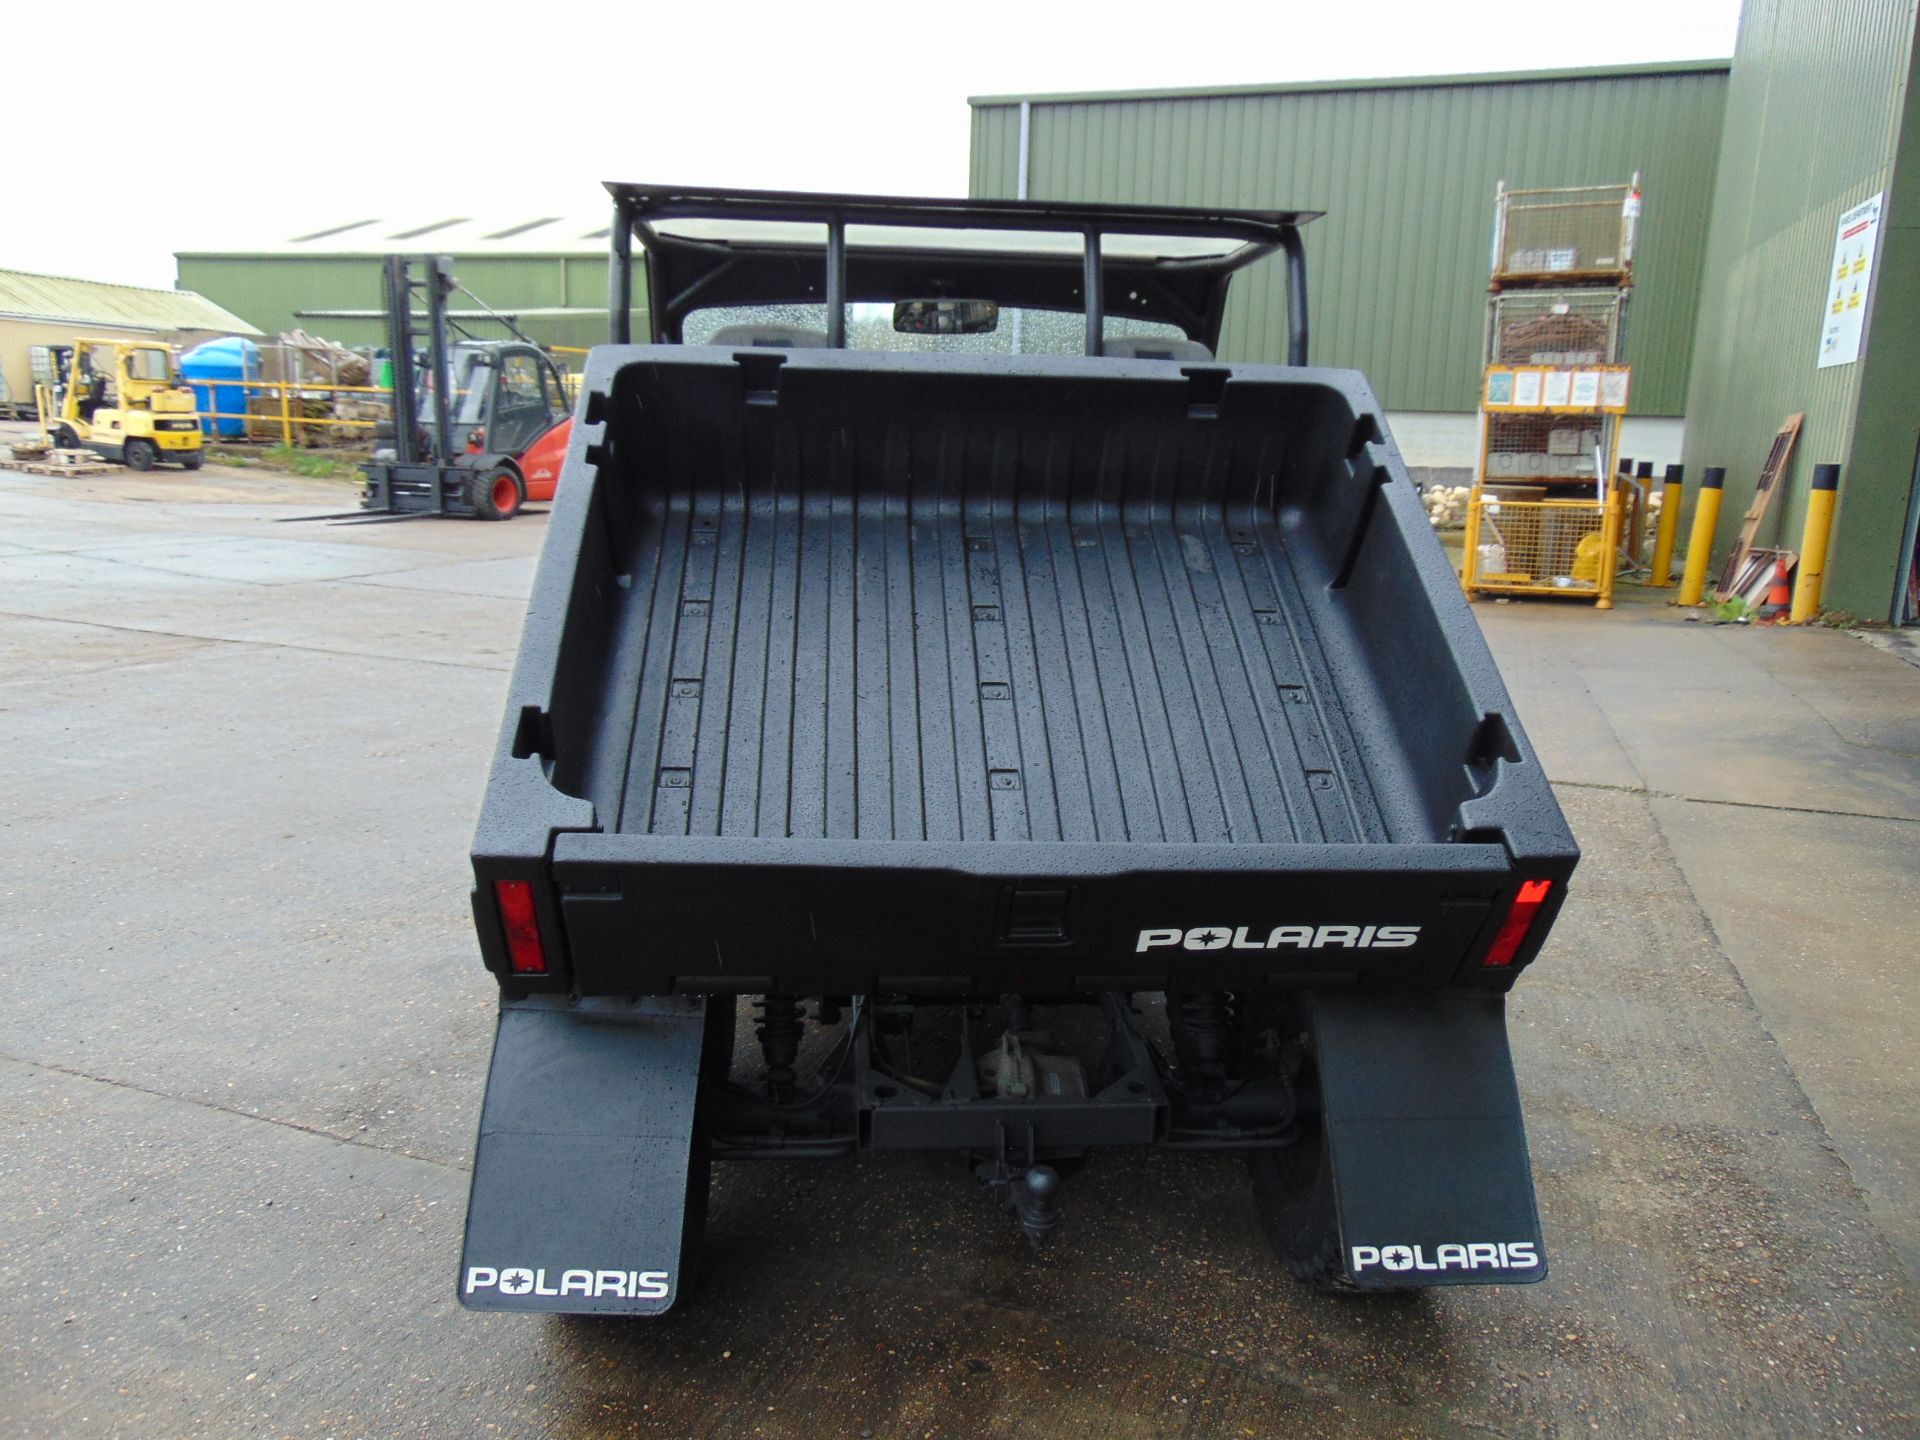 Polaris Ranger 6 x 6 Off-Road Utility Vehicle - Petrol Engine 555 hours Rec from Nat Grid - Image 25 of 30